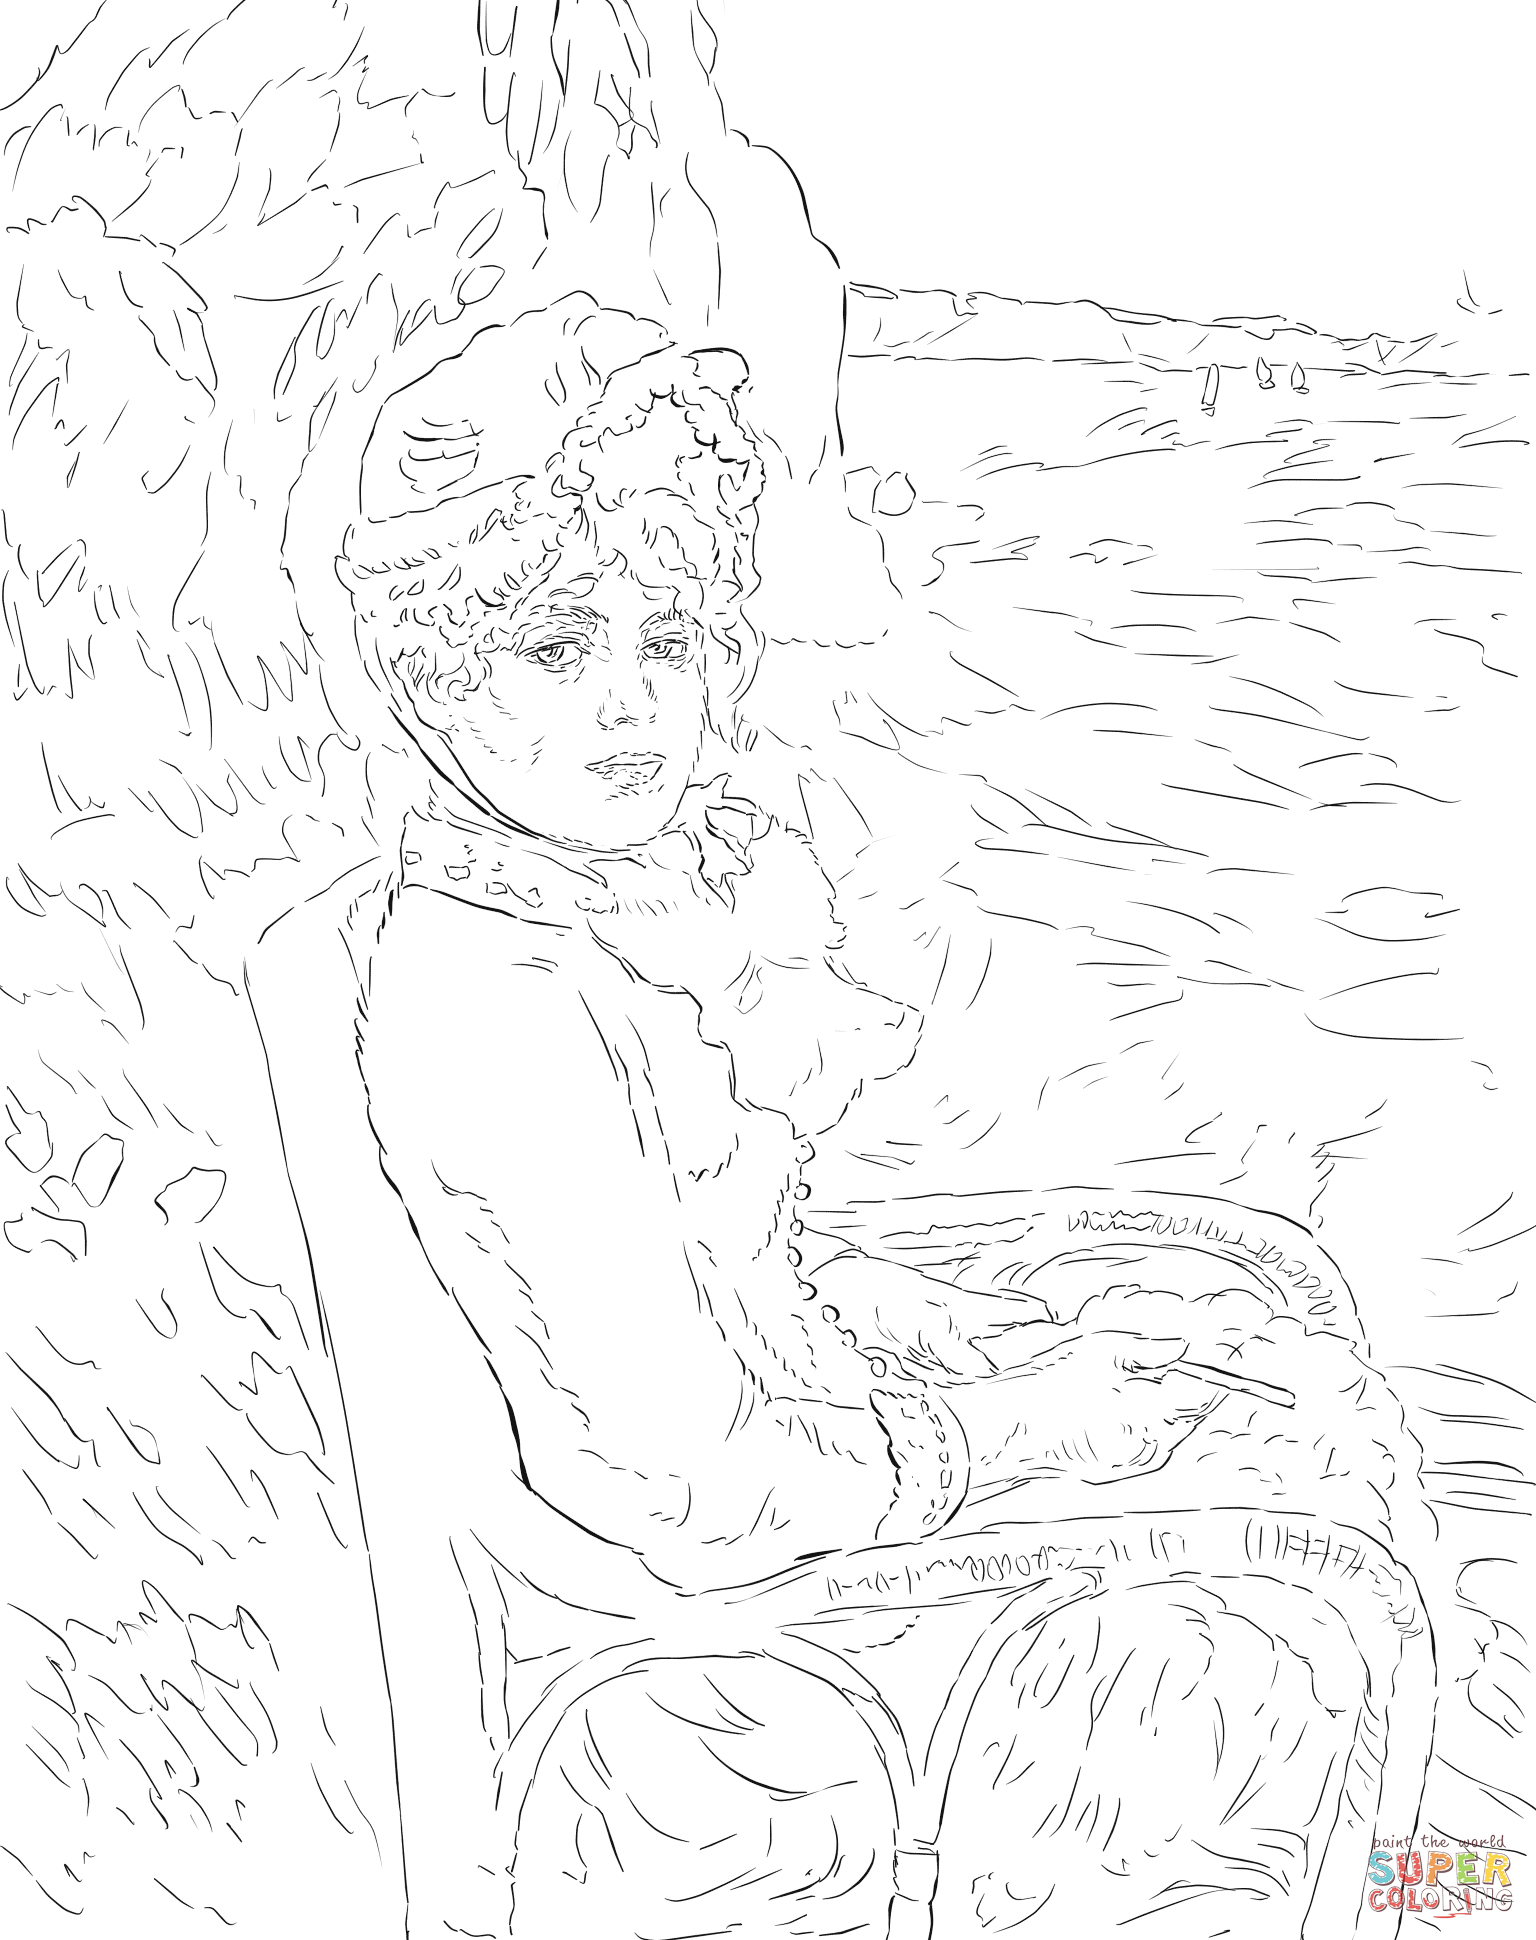 By the seashore by pierre auguste renoir coloring page free printable coloring pages